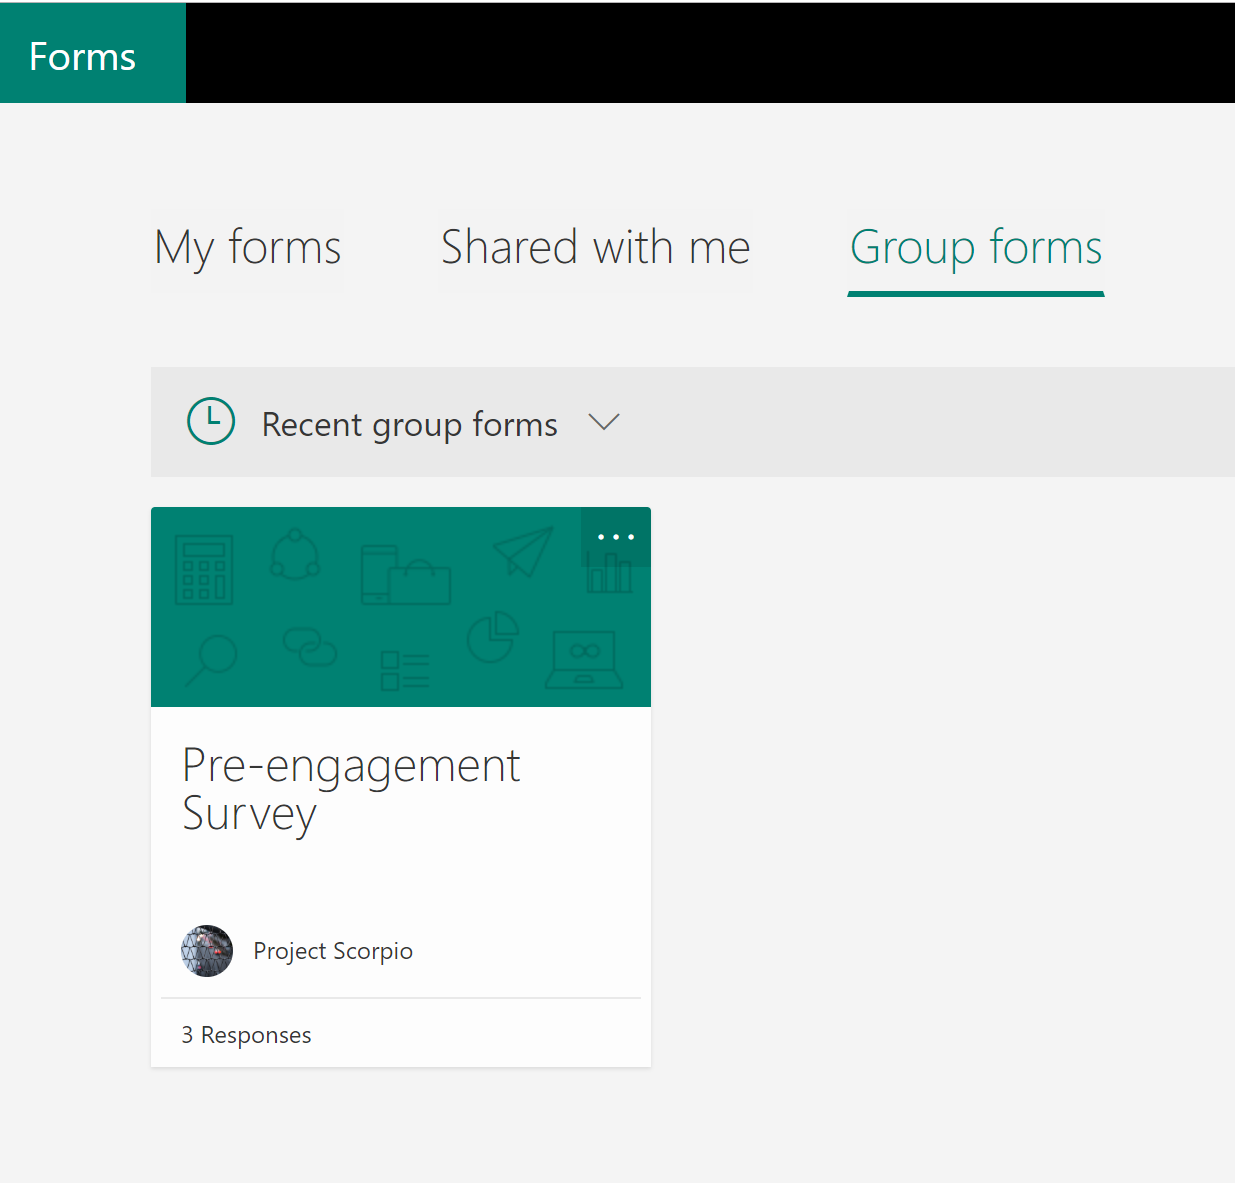 Groups forms in Microsoft Teams